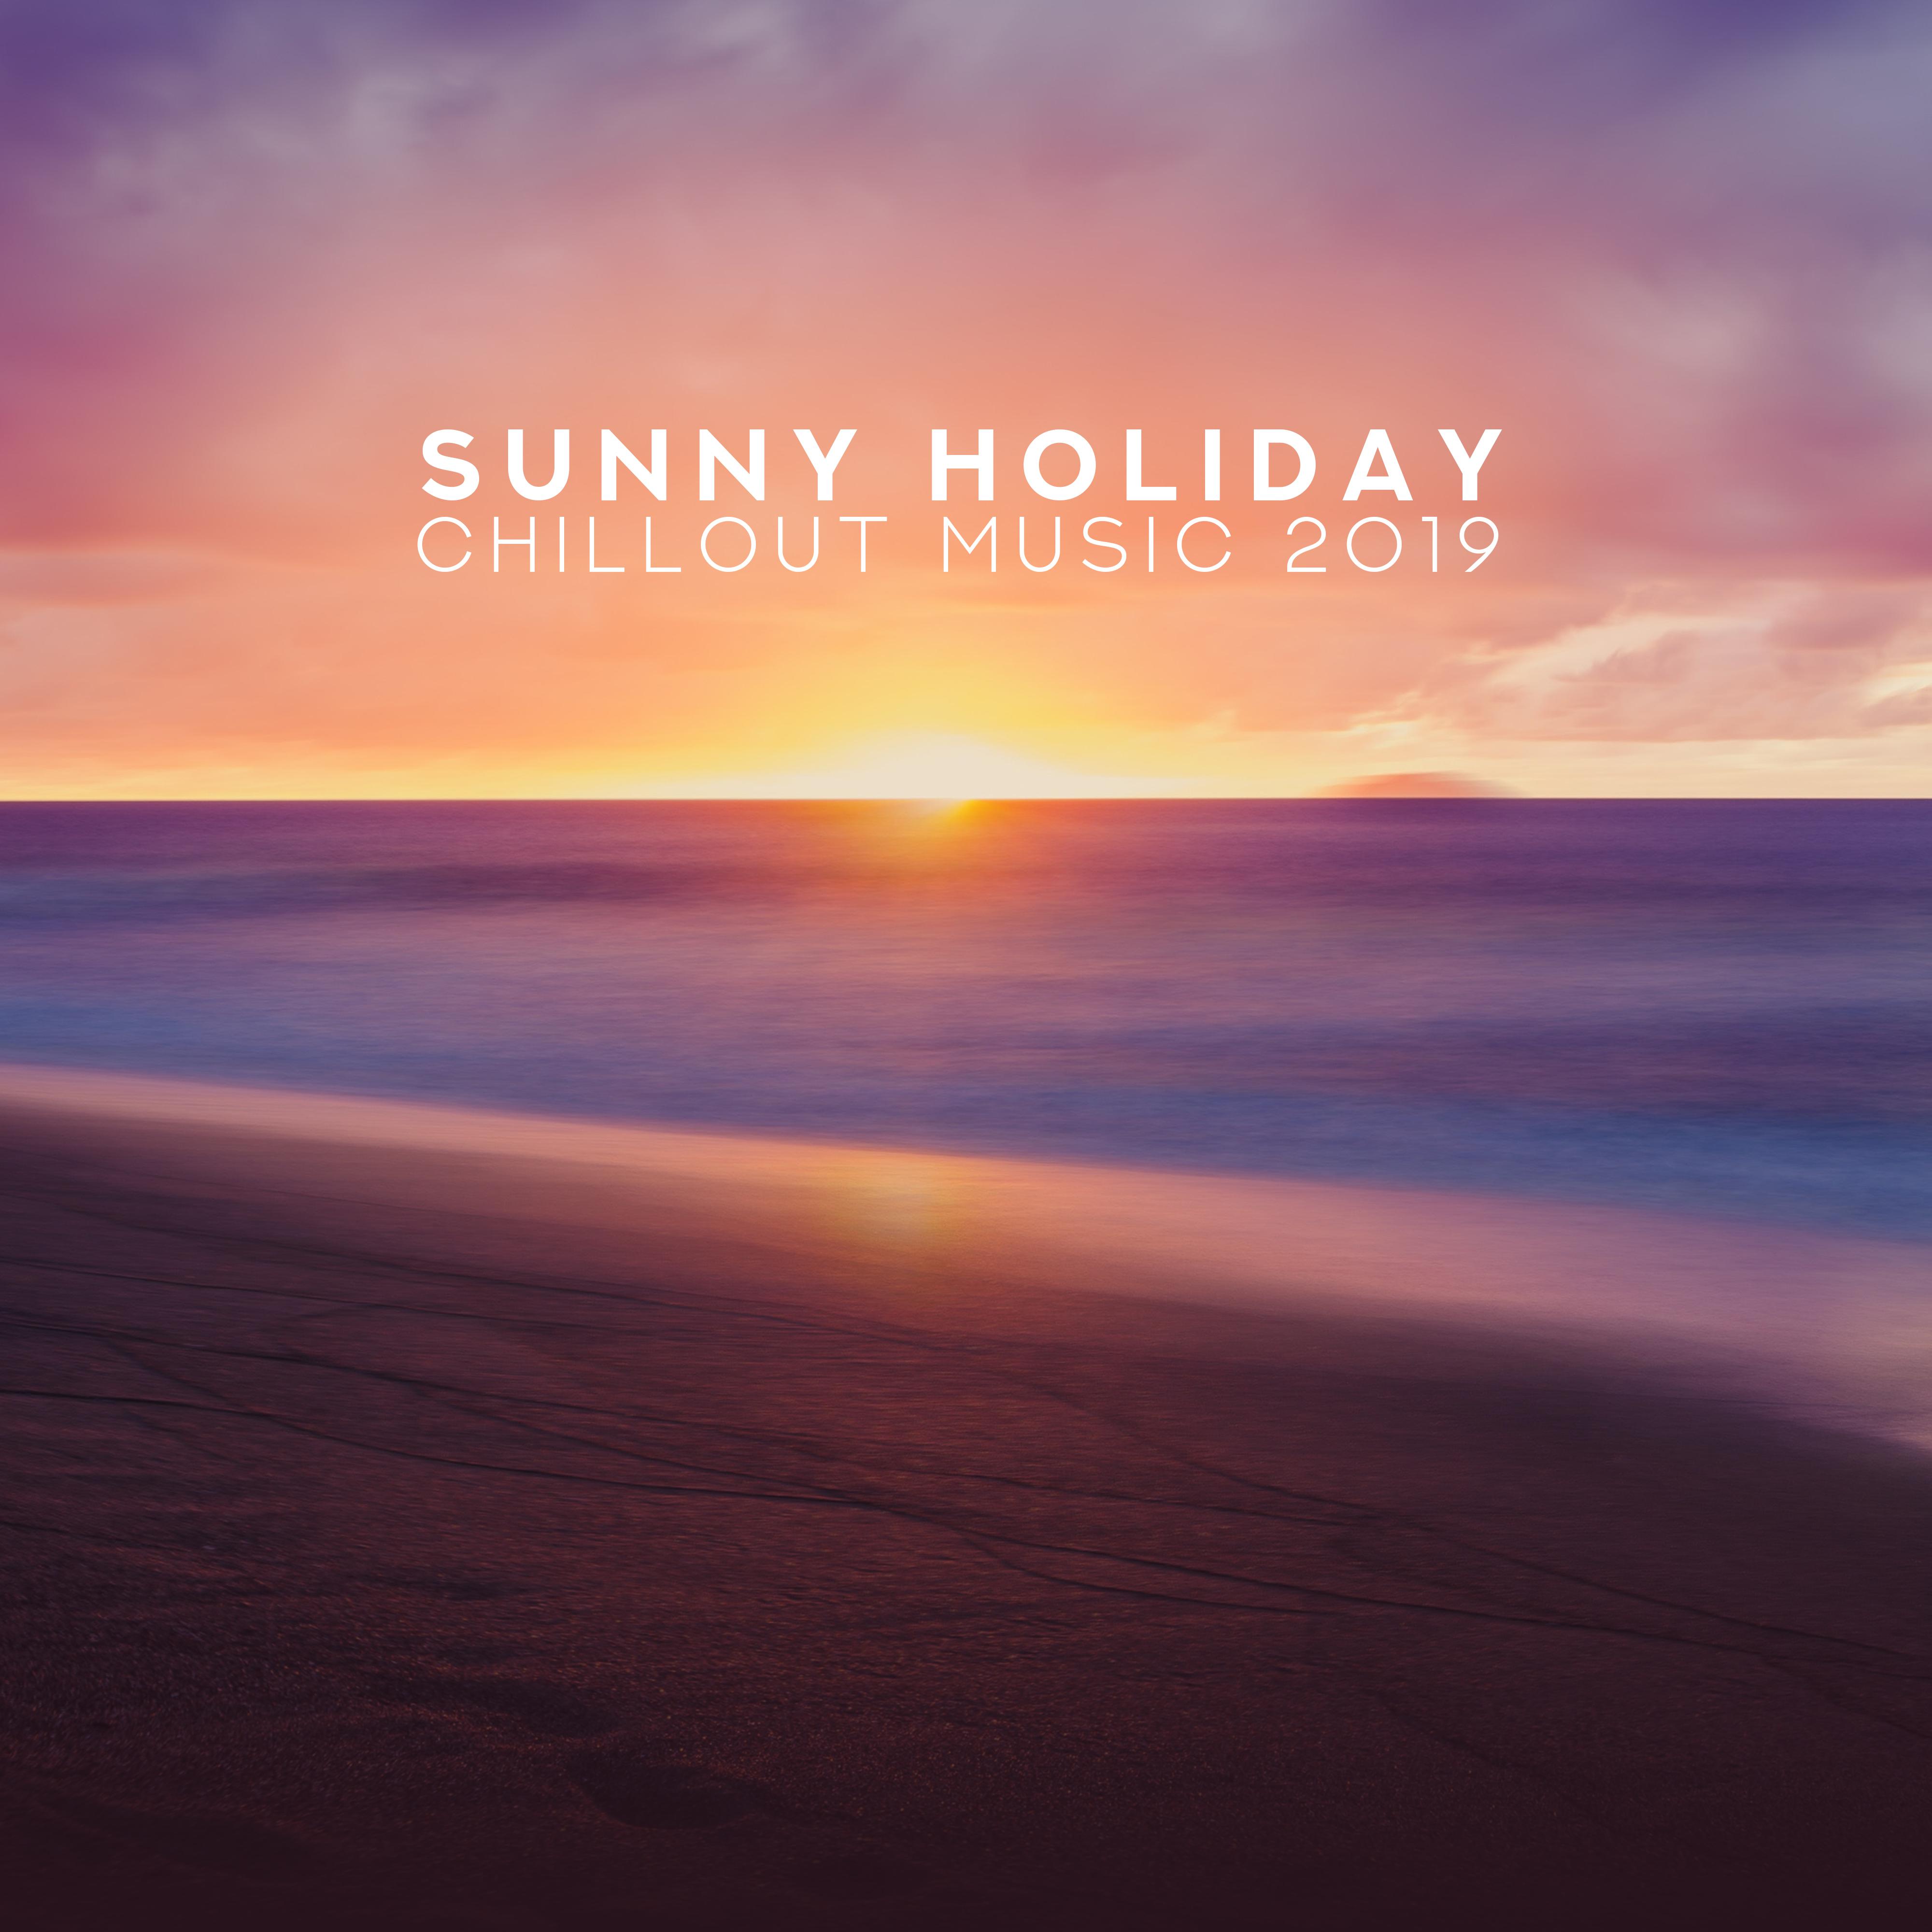 Sunny Holiday Chillout Music 2019: Compilation of 15 Chill Out Fresh Songs, Energetic Beats & Relaxing Vibes, Total Chill on the Beach